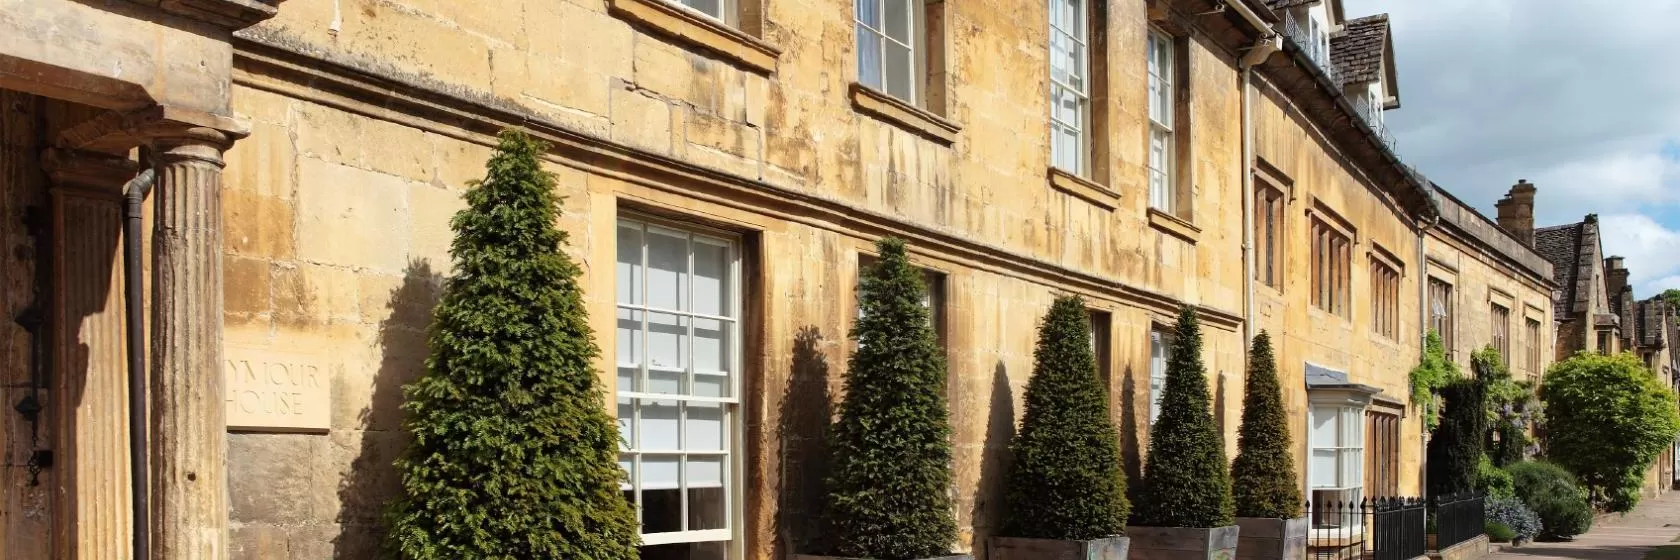 Chipping Campden, Gloucestershire Hotels